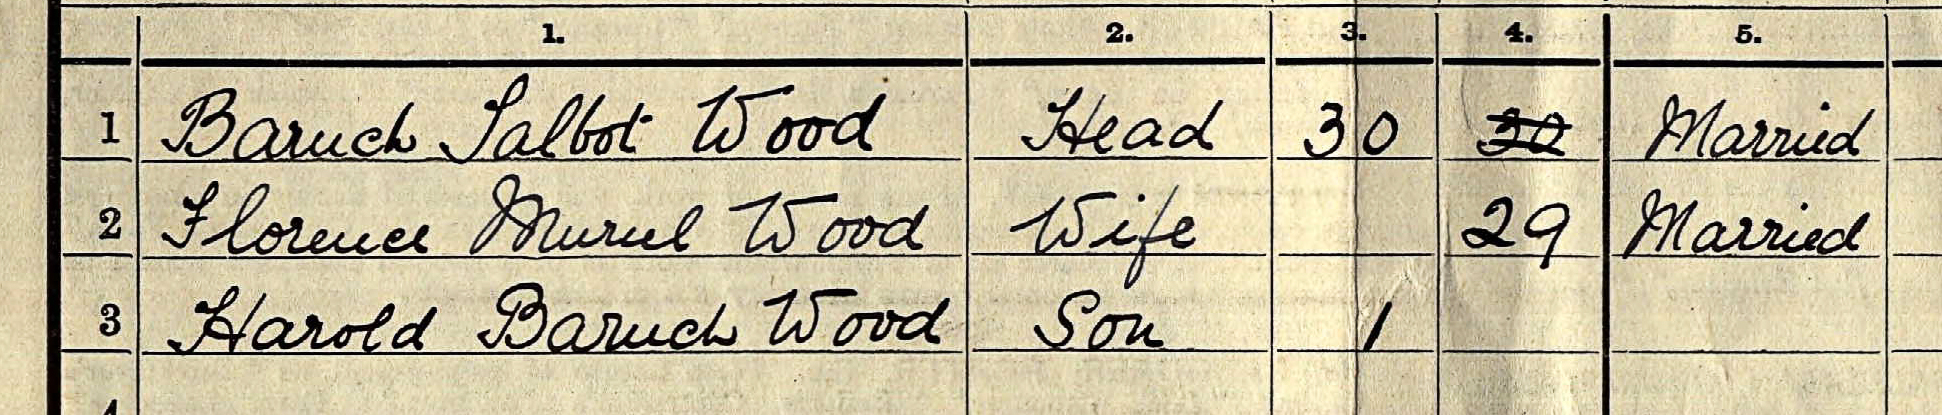 1911 Census record for the Wood household